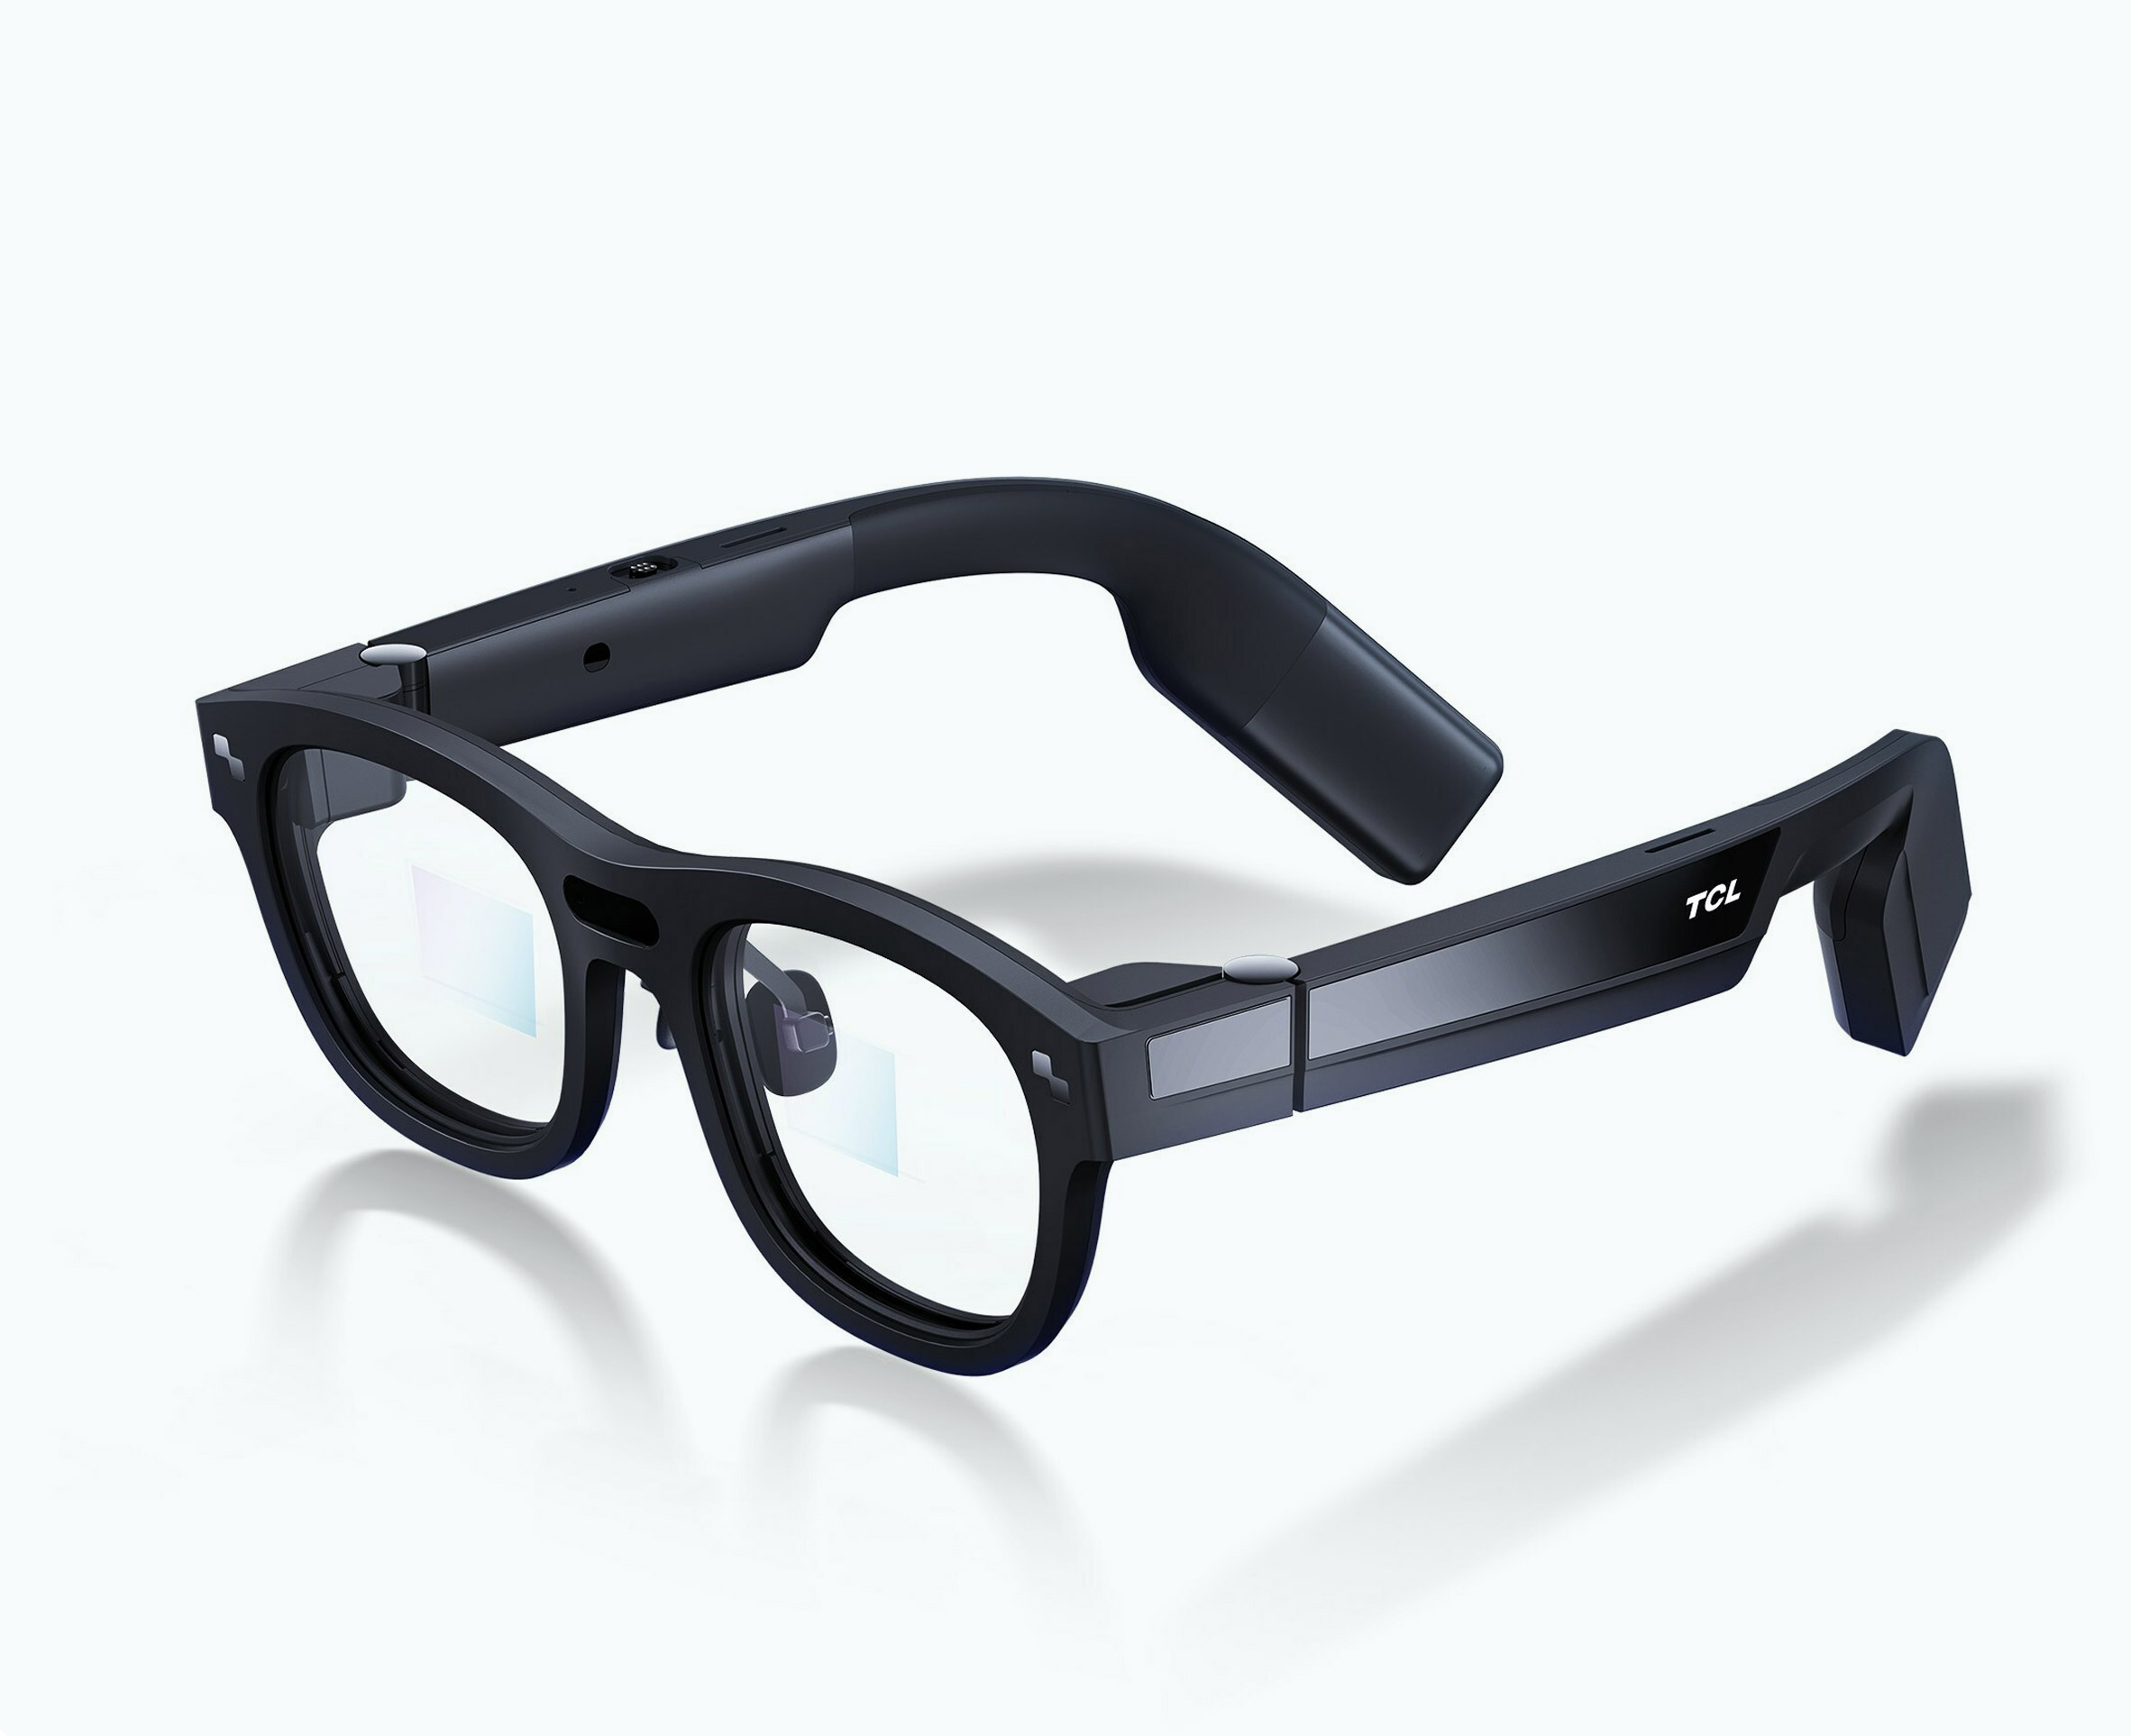 TCL unveils AR glasses that overlay the world with digital info Designlab